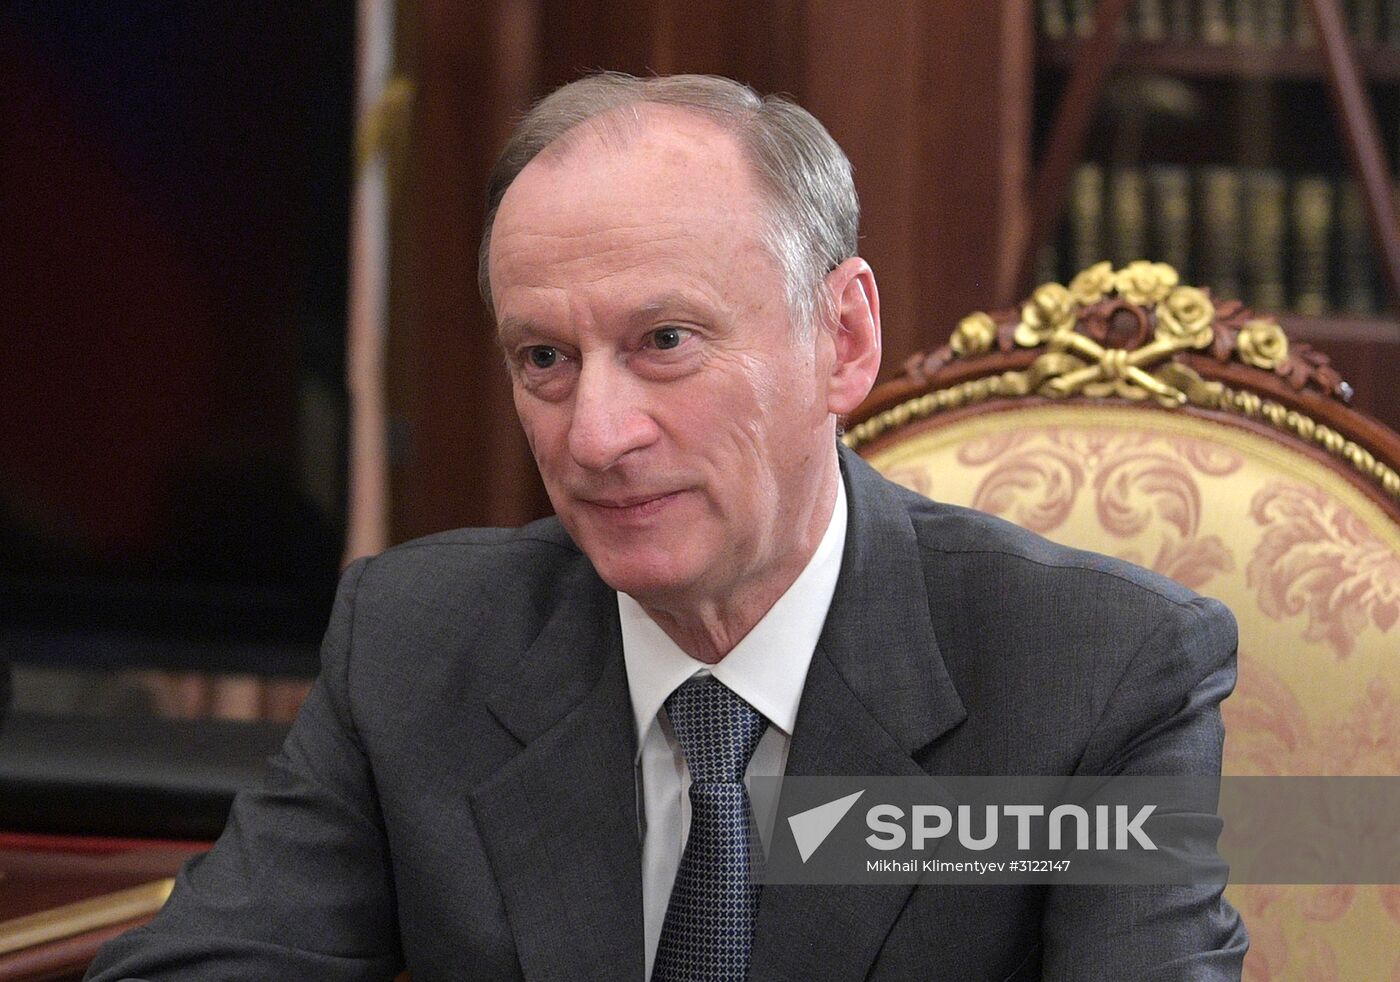 President Putin meets with Russia's Security Council Secretary Patrushev